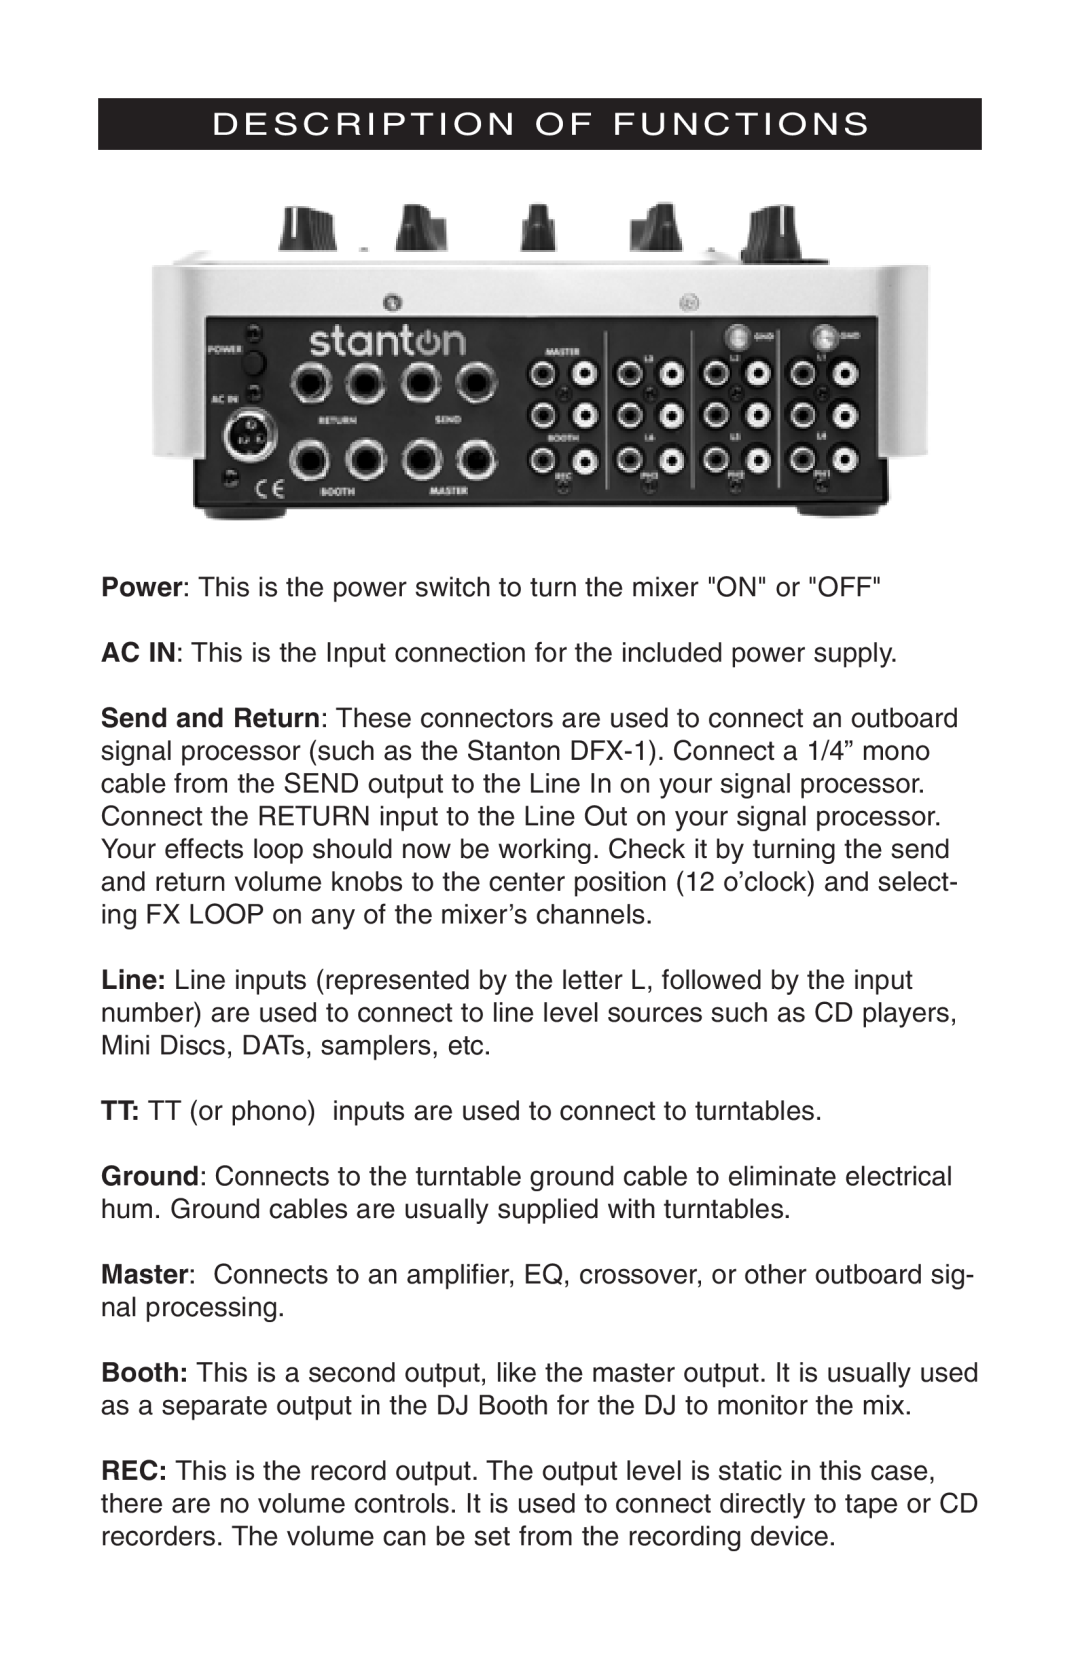 Stanton M304 owner manual Description Of Functions, Power This is the power switch to turn the mixer ON or OFF 